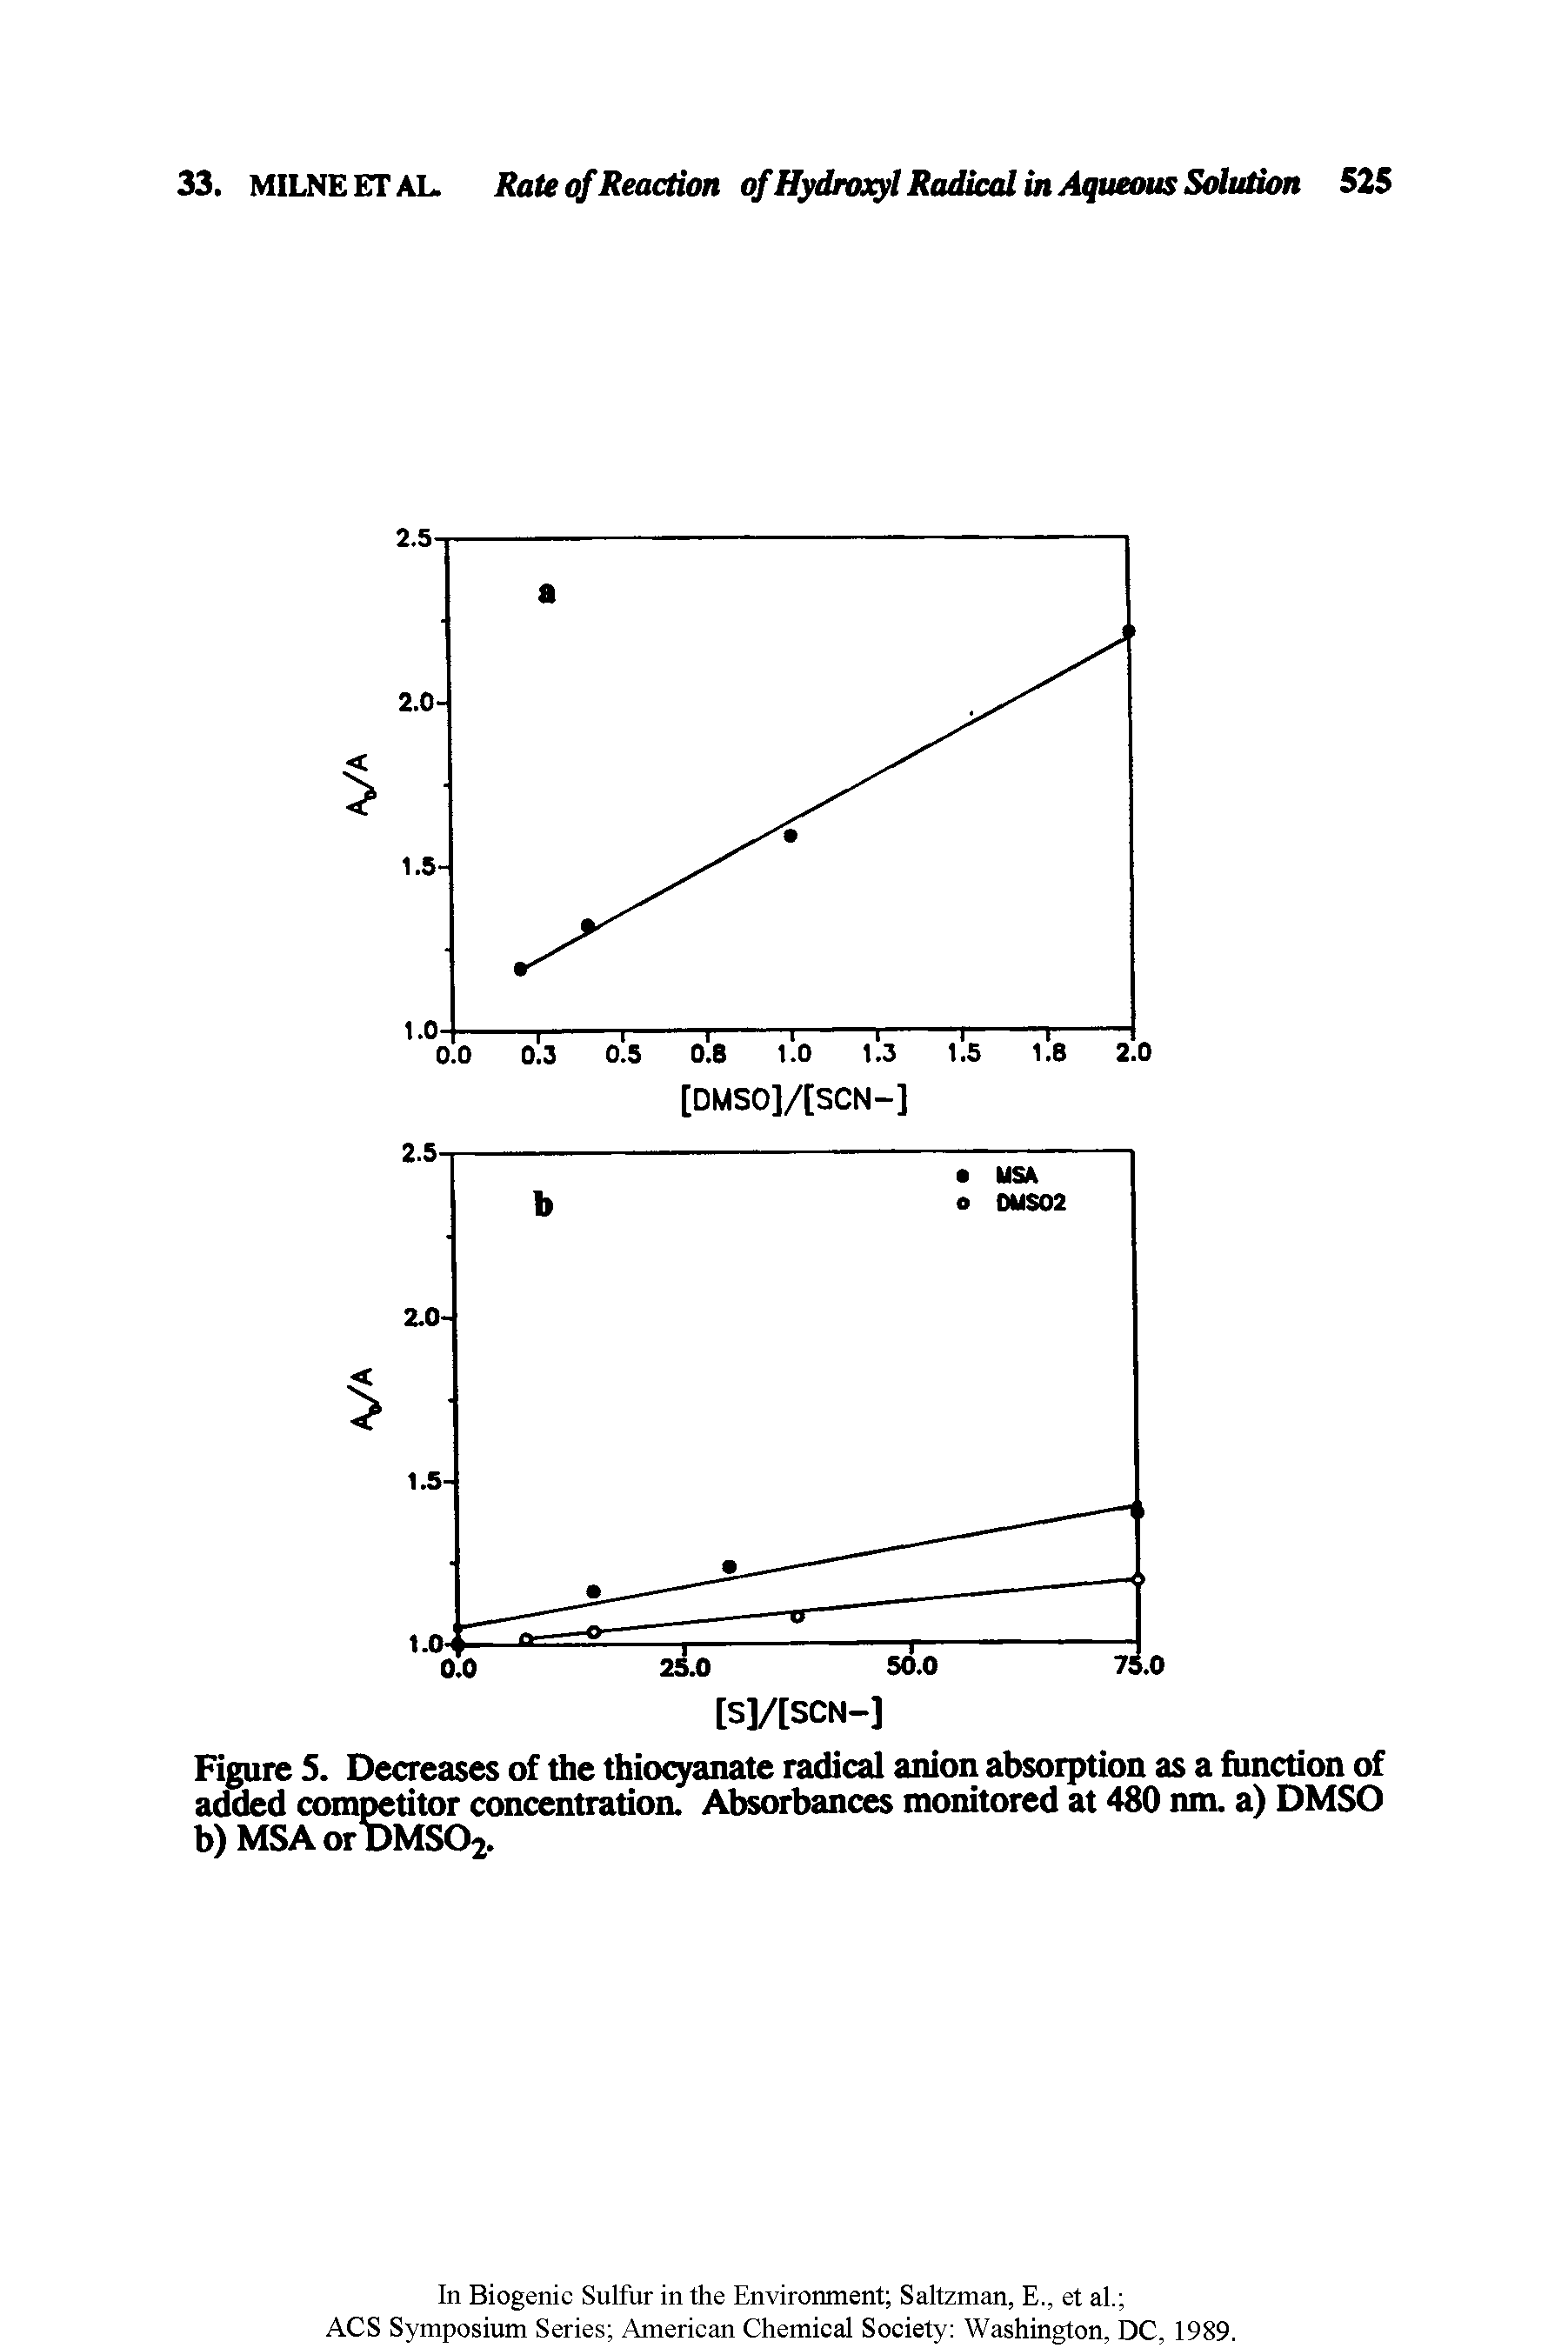 Figure 5. Decreases of the thiocyanate radical anion absorption as a function of added competitor concentration. Absorbances monitored at 480 nm. a) DMSO b)MSAorDMS02.